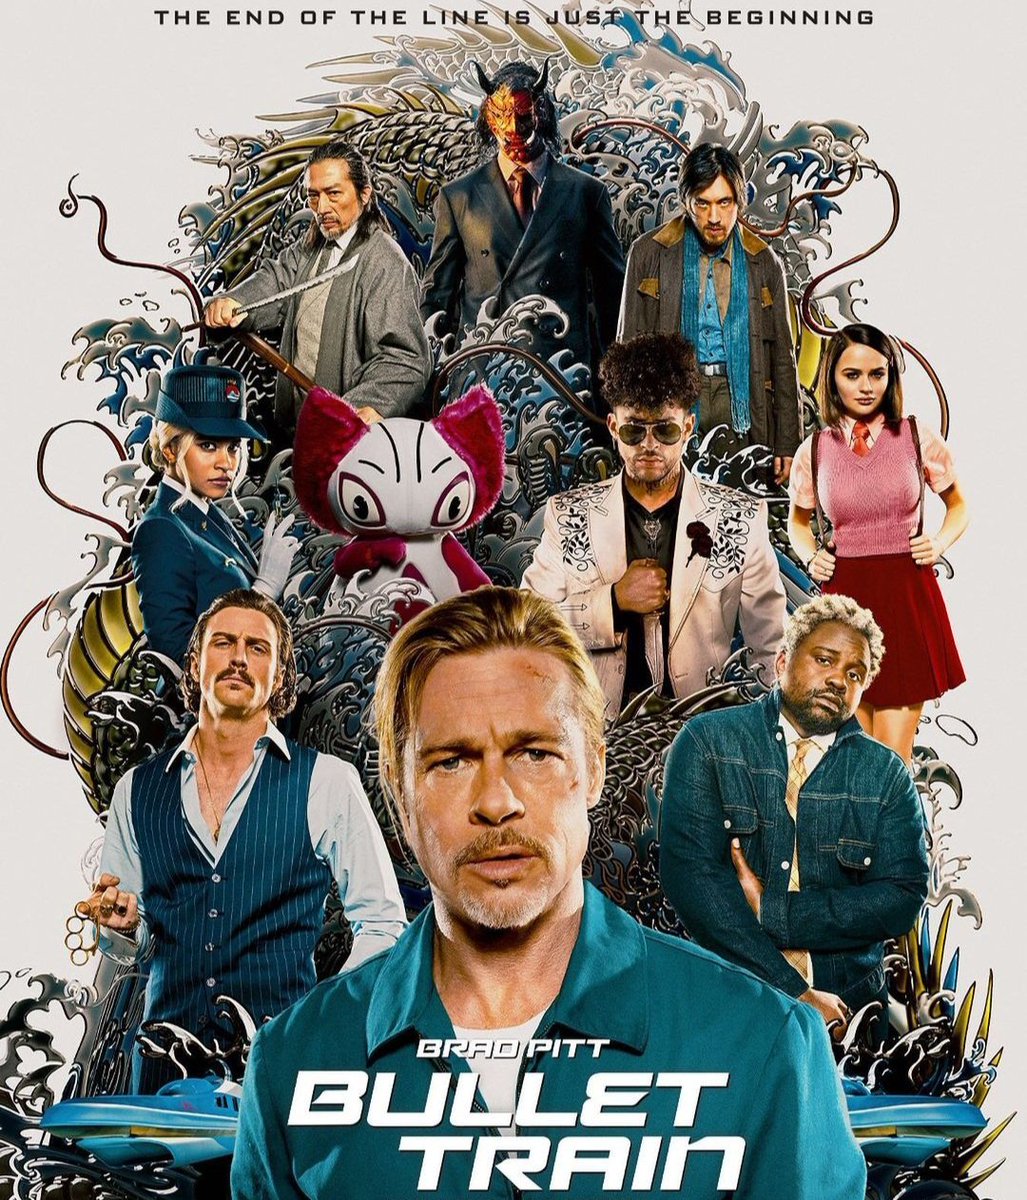 Saw Bullet Train today (finally!) Blood, guts, f'cking hilarious, many familiar faces, and awesome action sequences! LOVE IT!!!